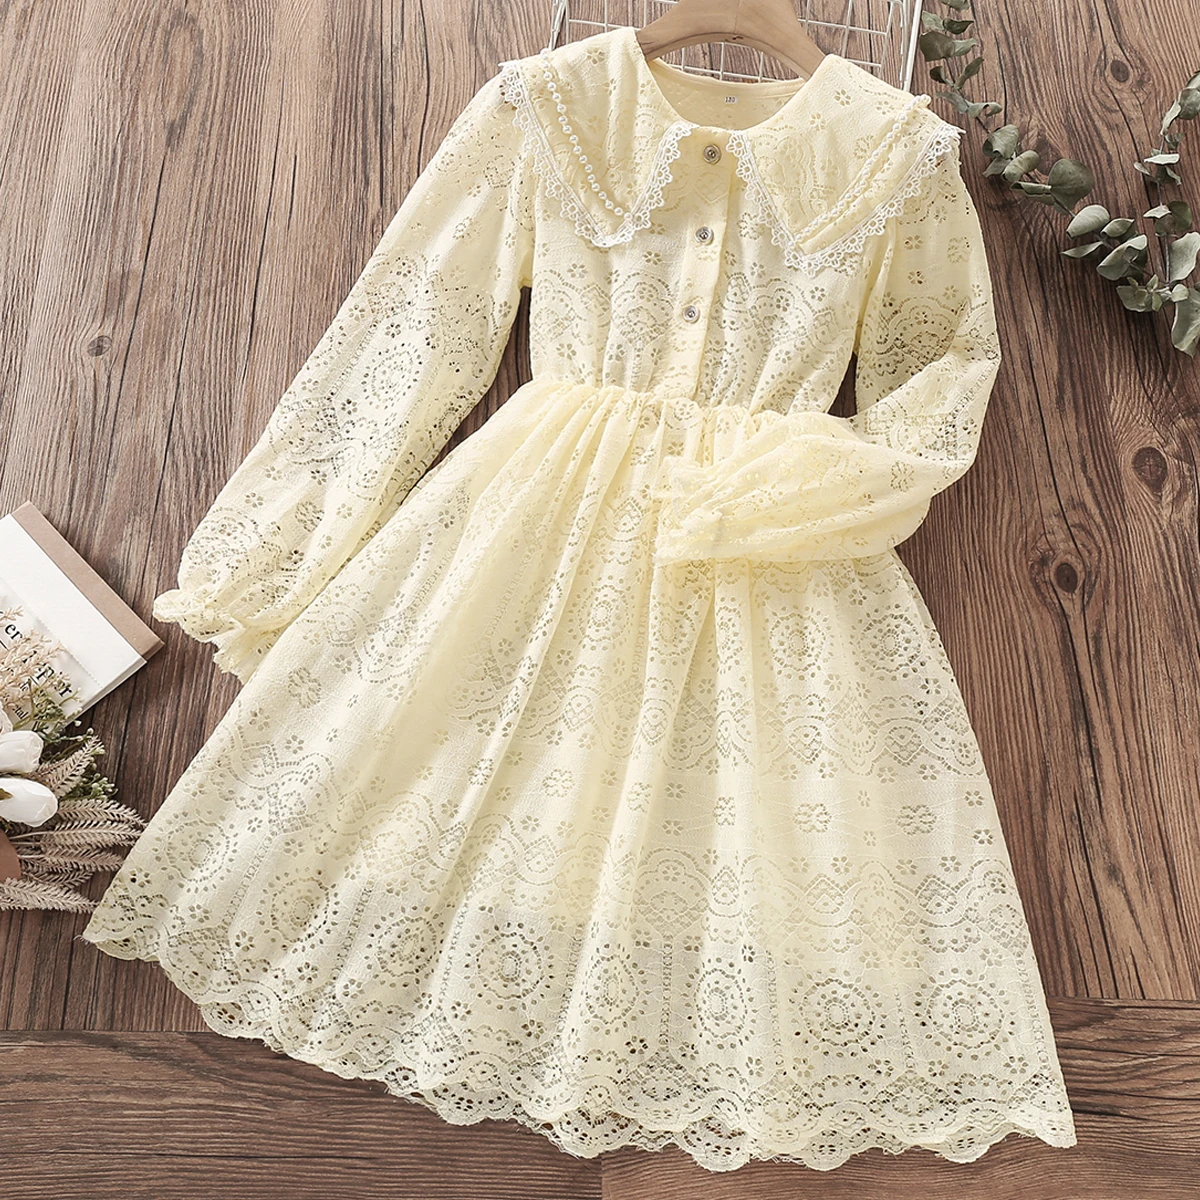 Lace Dresses for Girls Party Elegant Dress Kids Princess Costume Teenagers School Children Clothes Vestidos 4 6 8 9 10 12 Years